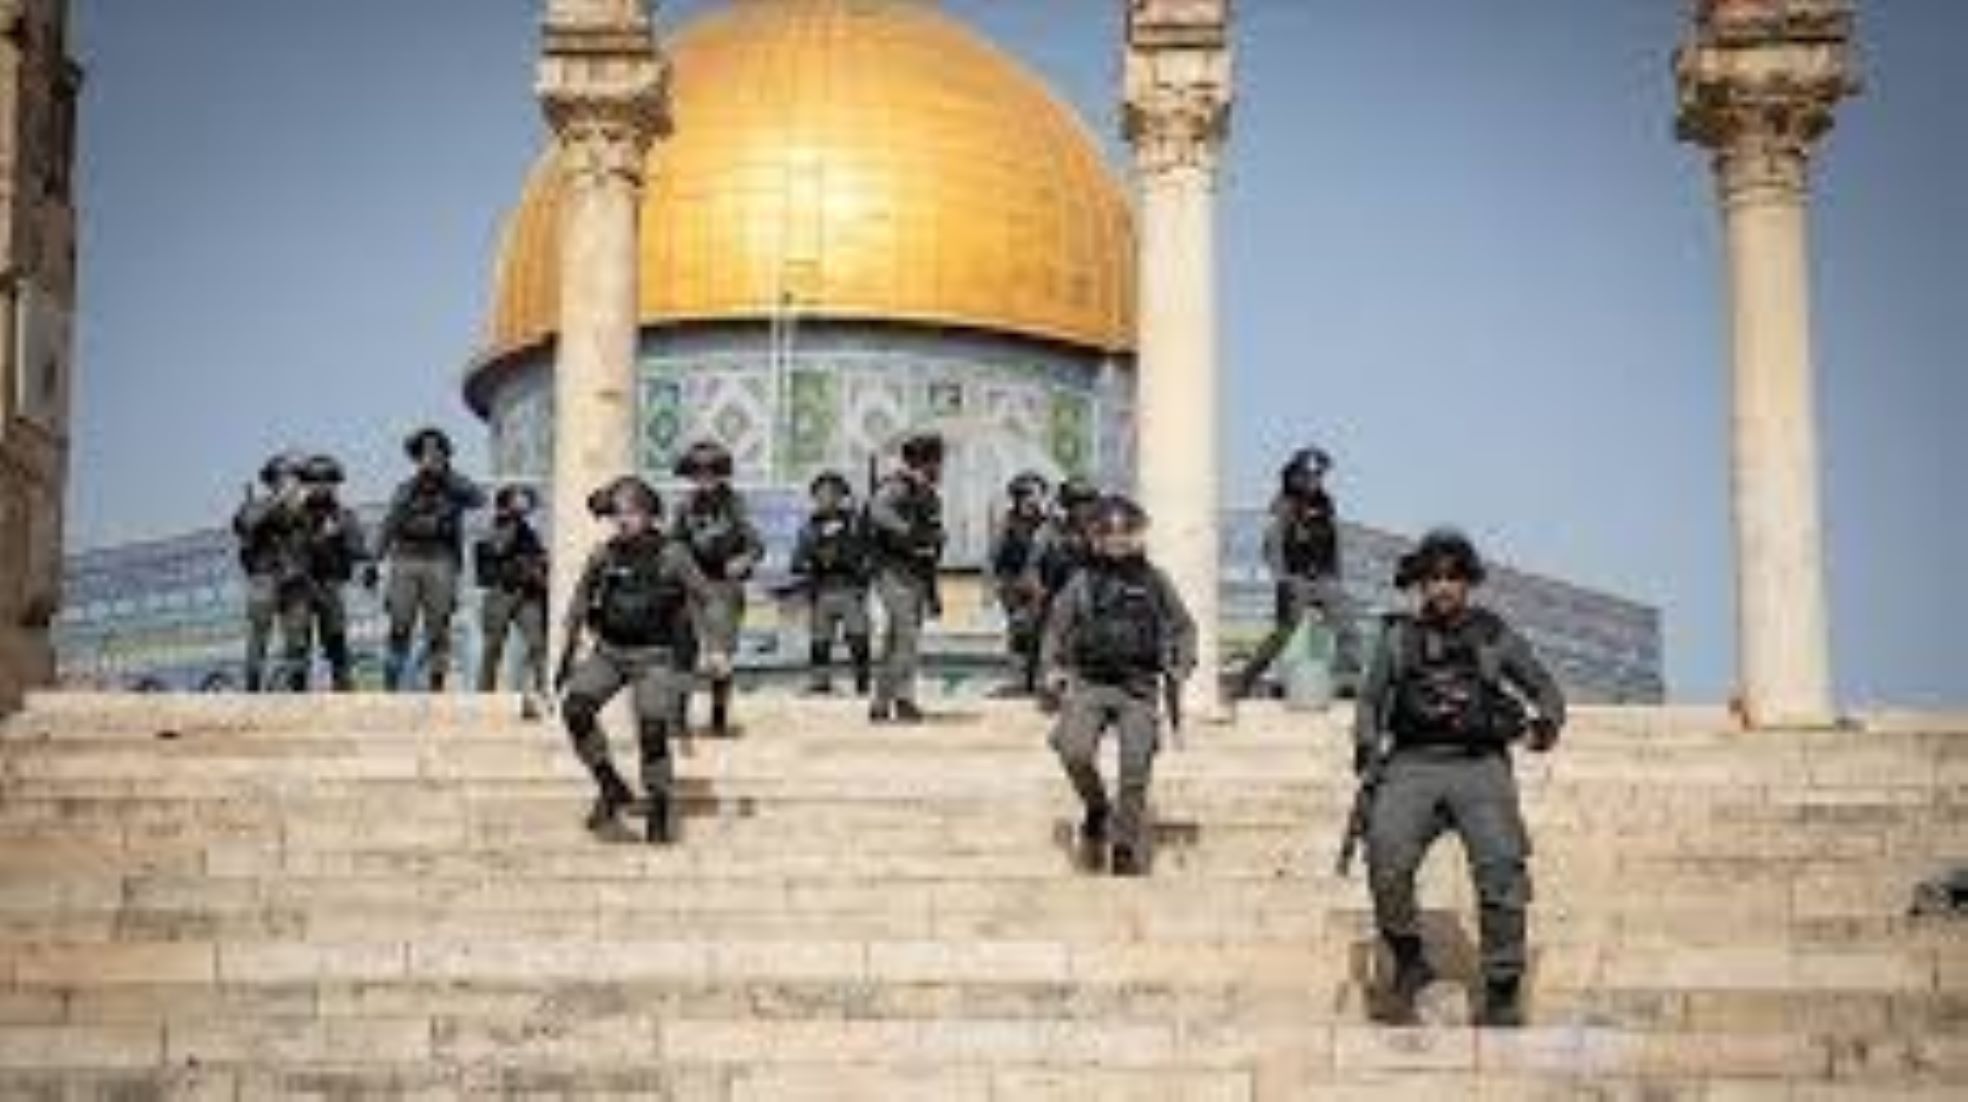 Palestinian Official Rejects Change In Al-Aqsa Status Quo